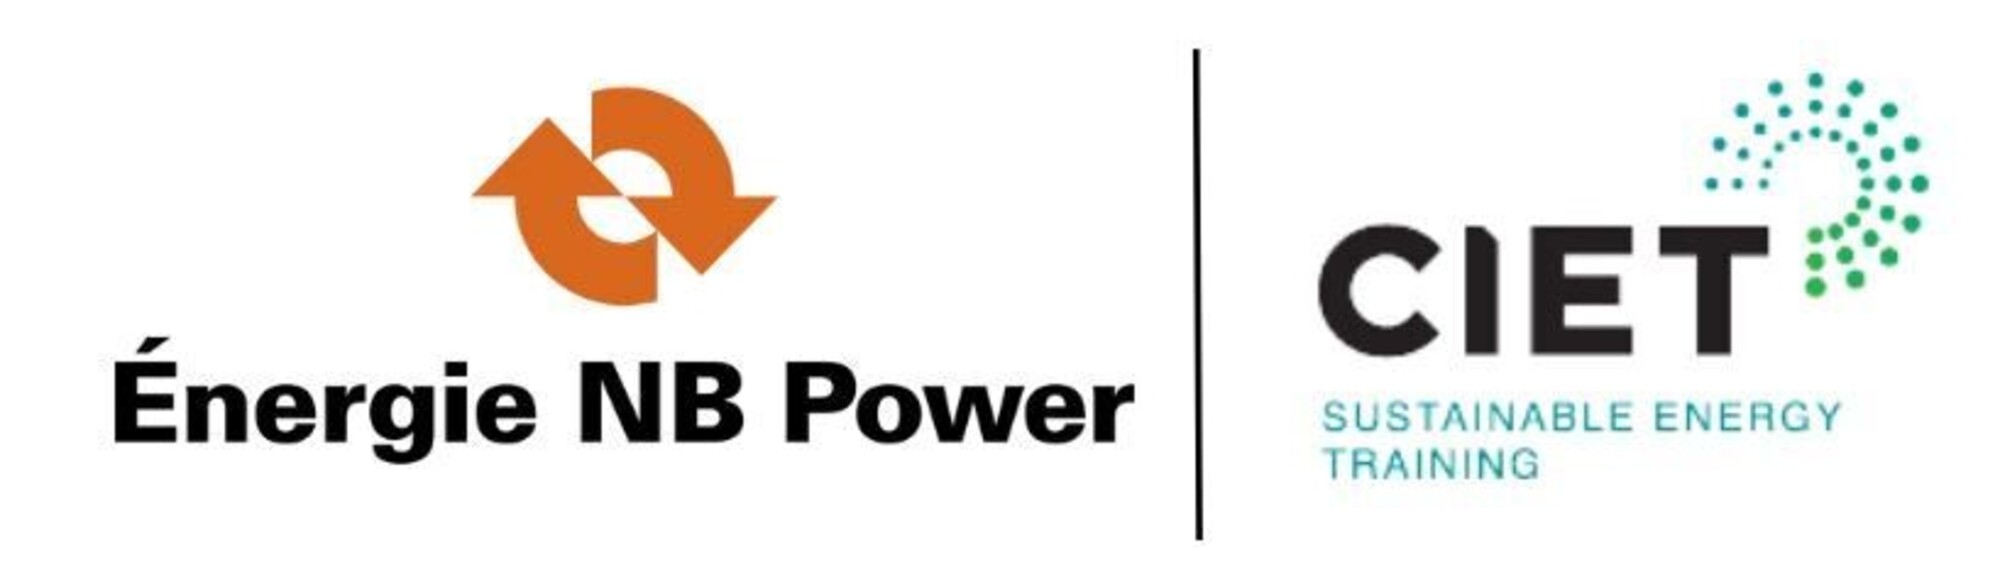 NB Power - Building Energy Modelling Professional